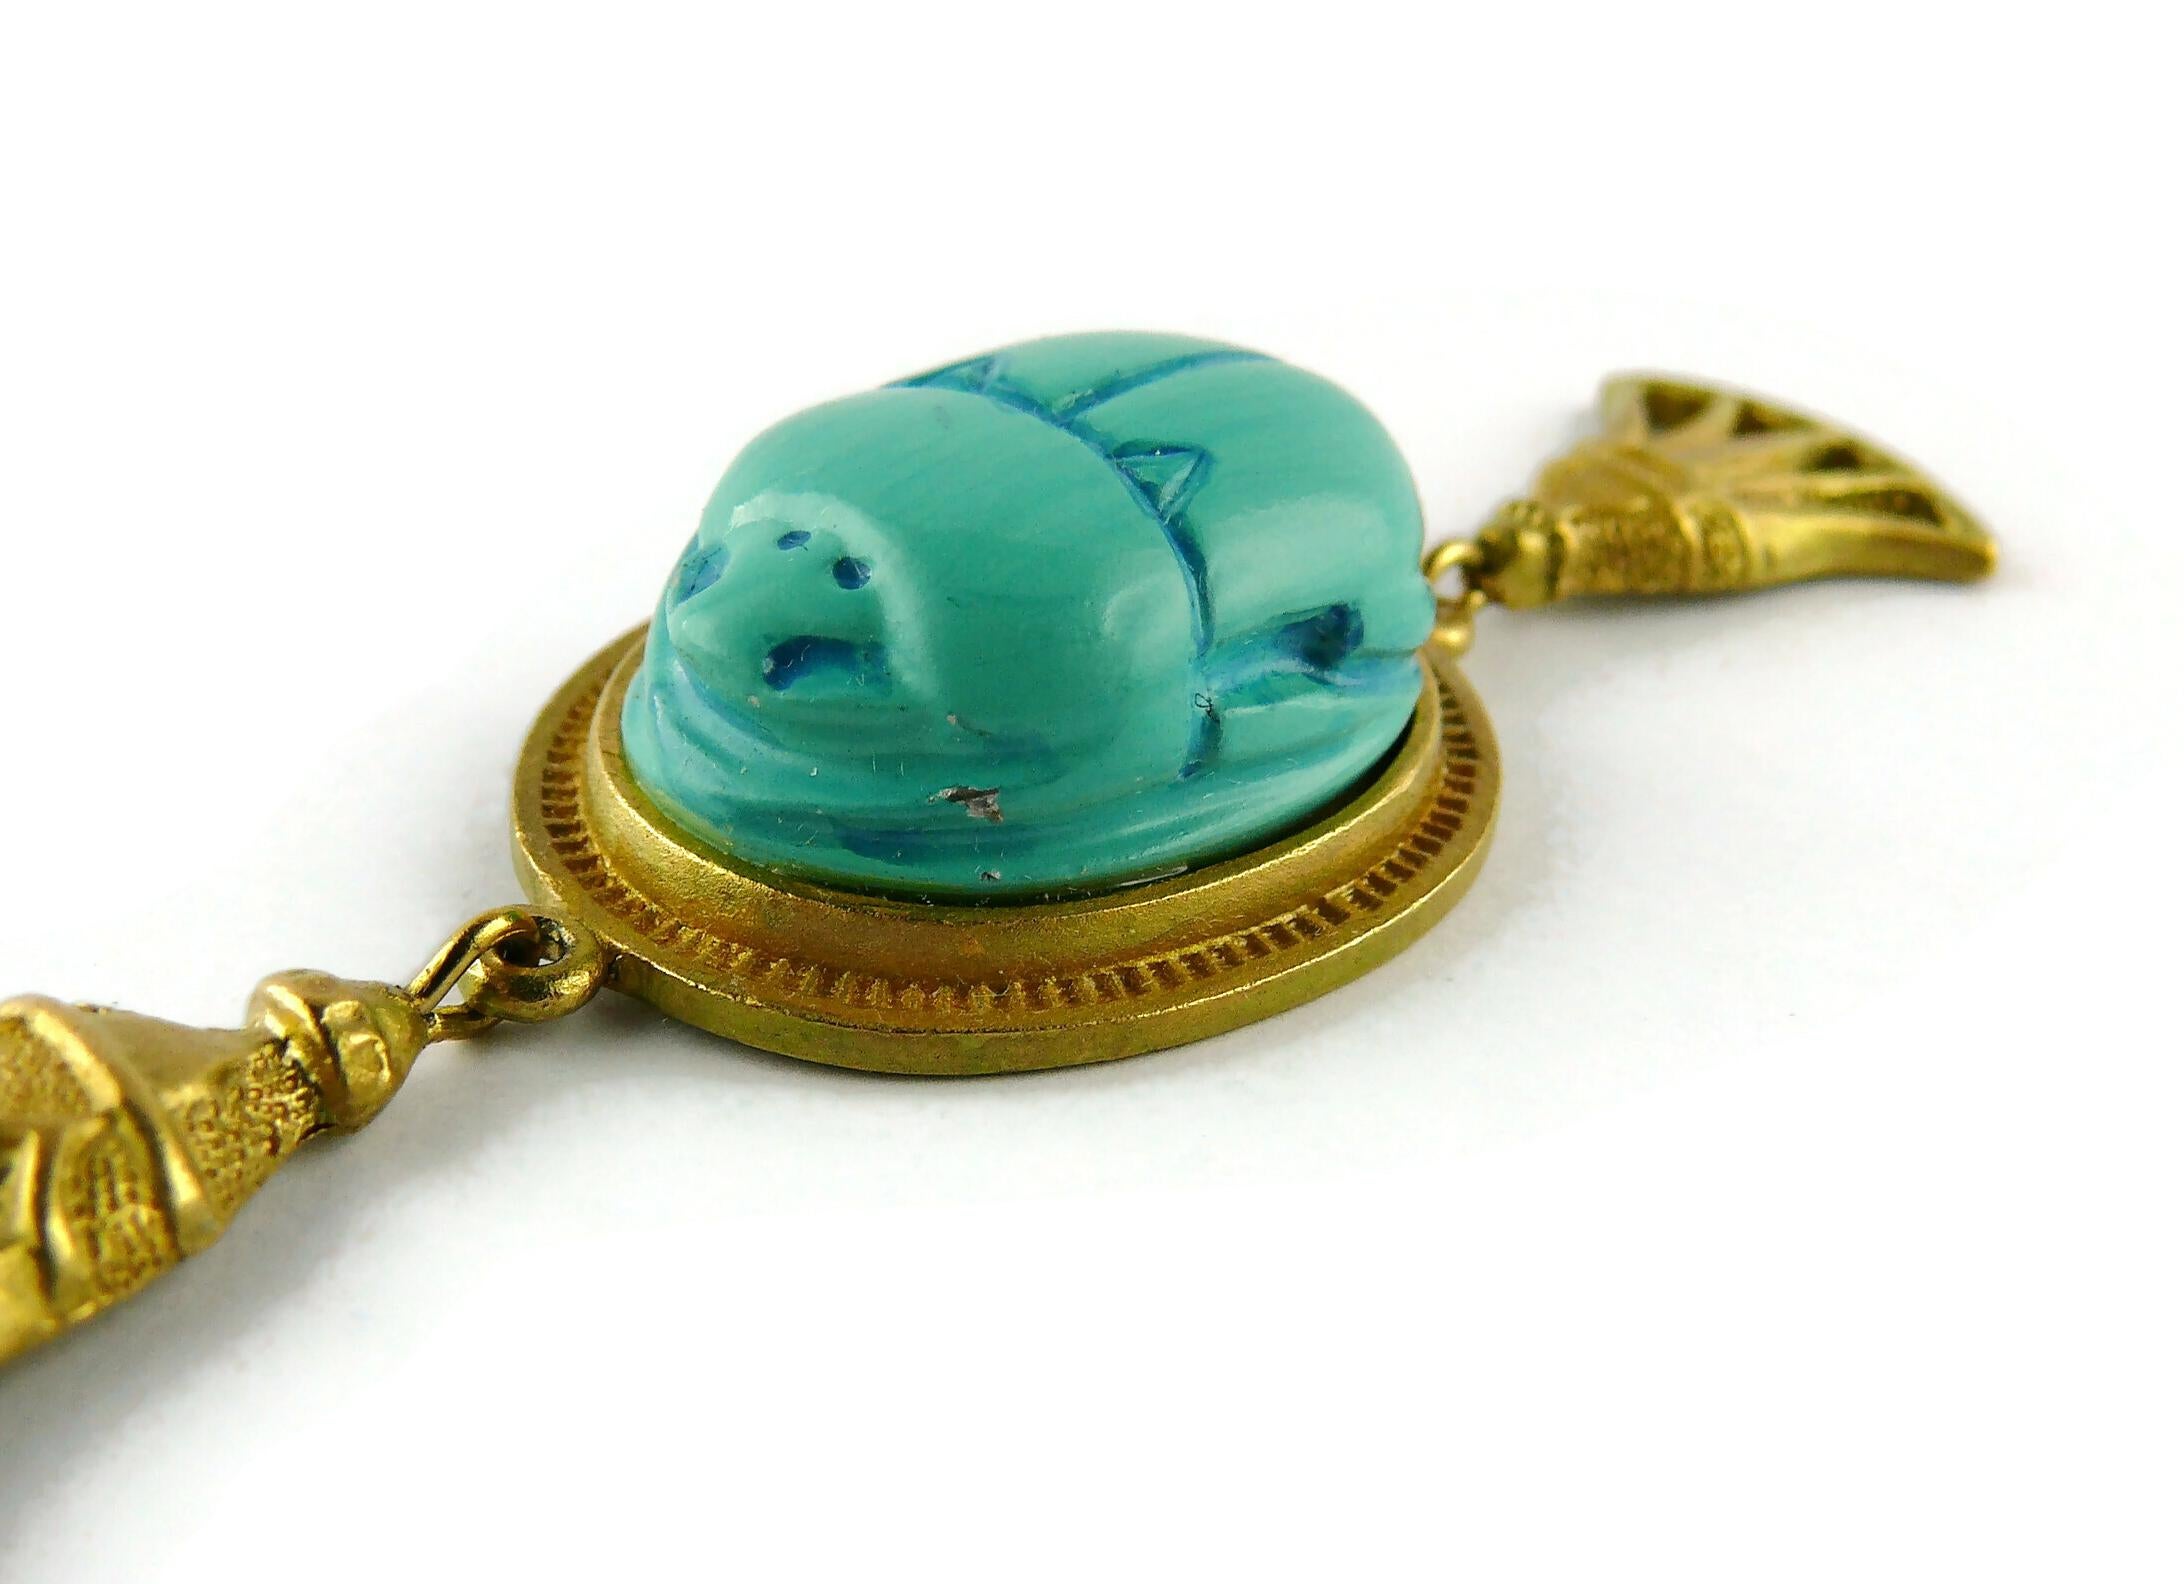 Christian Dior Egyptian Revival Faux Turquoise Scarab Necklace 7